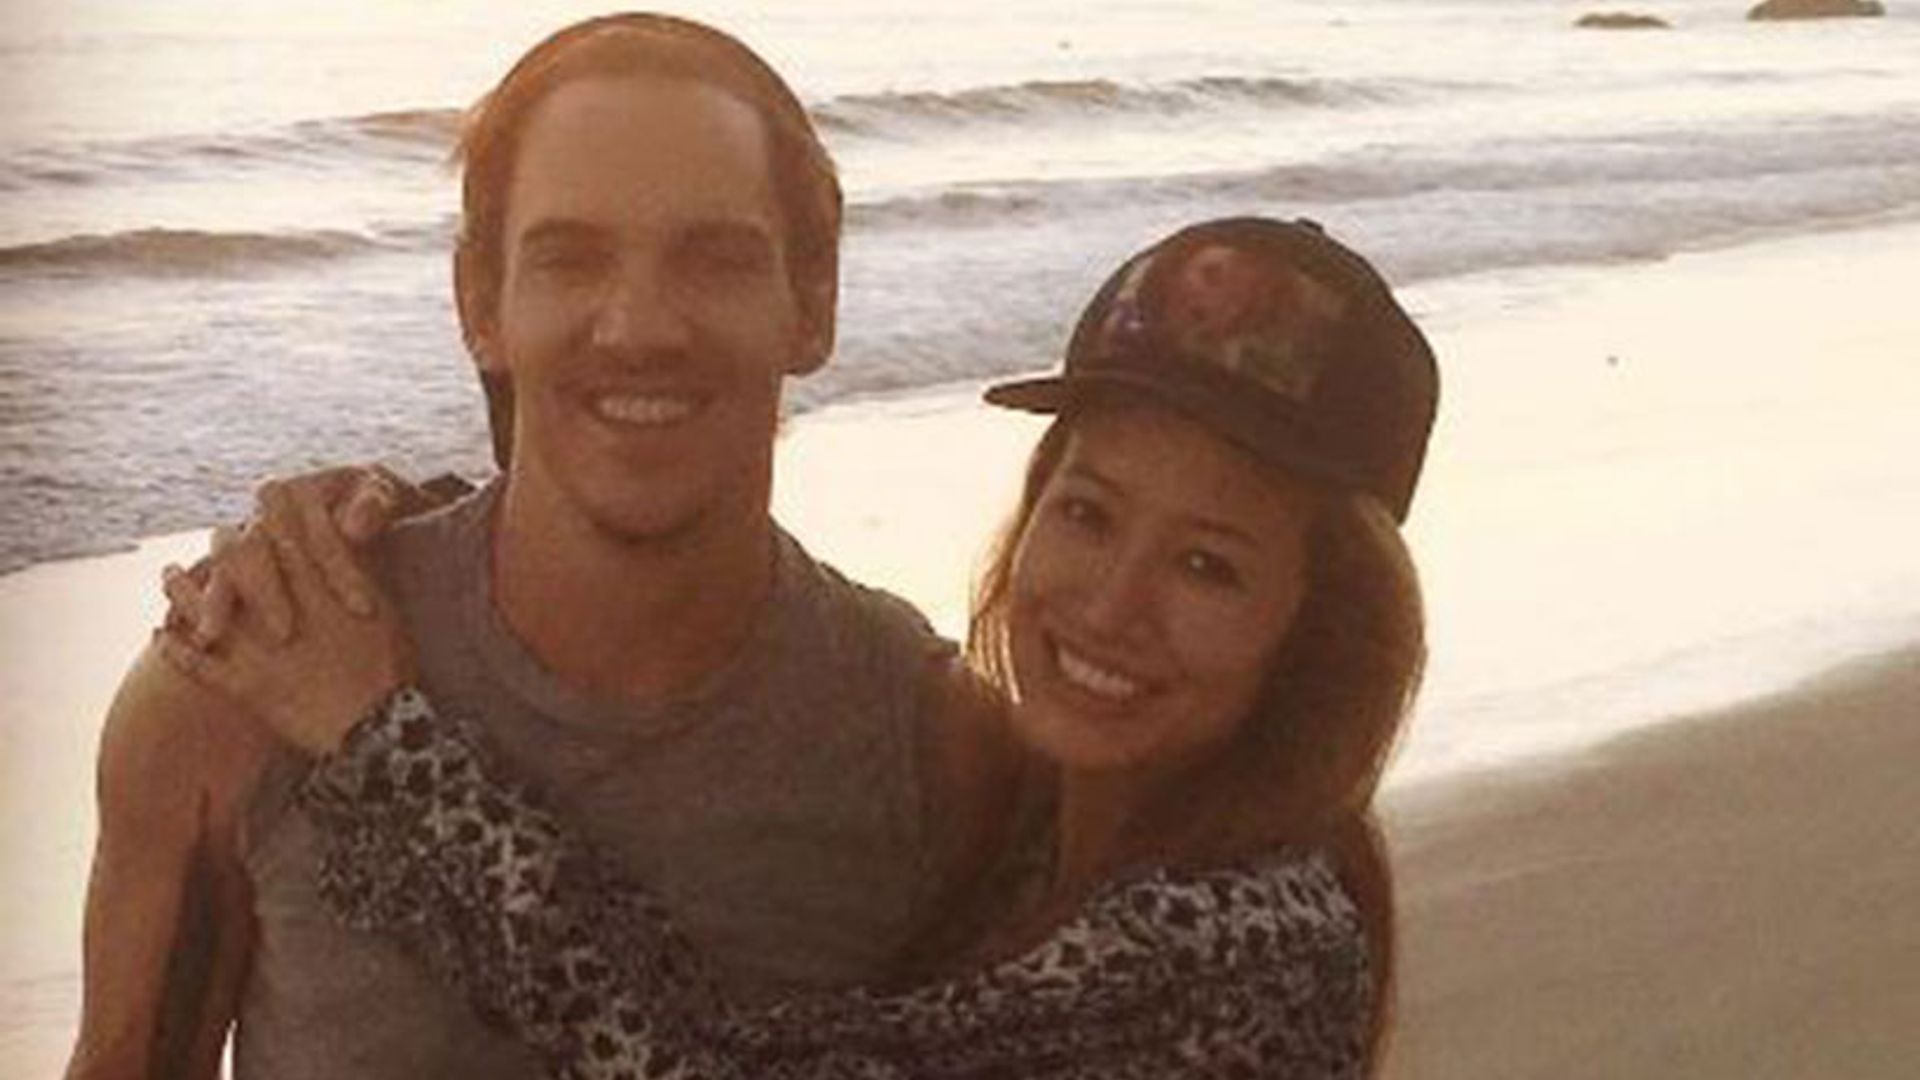 Jonathan Rhys Meyers and partner Mara Lane share beautiful first picture of their baby son